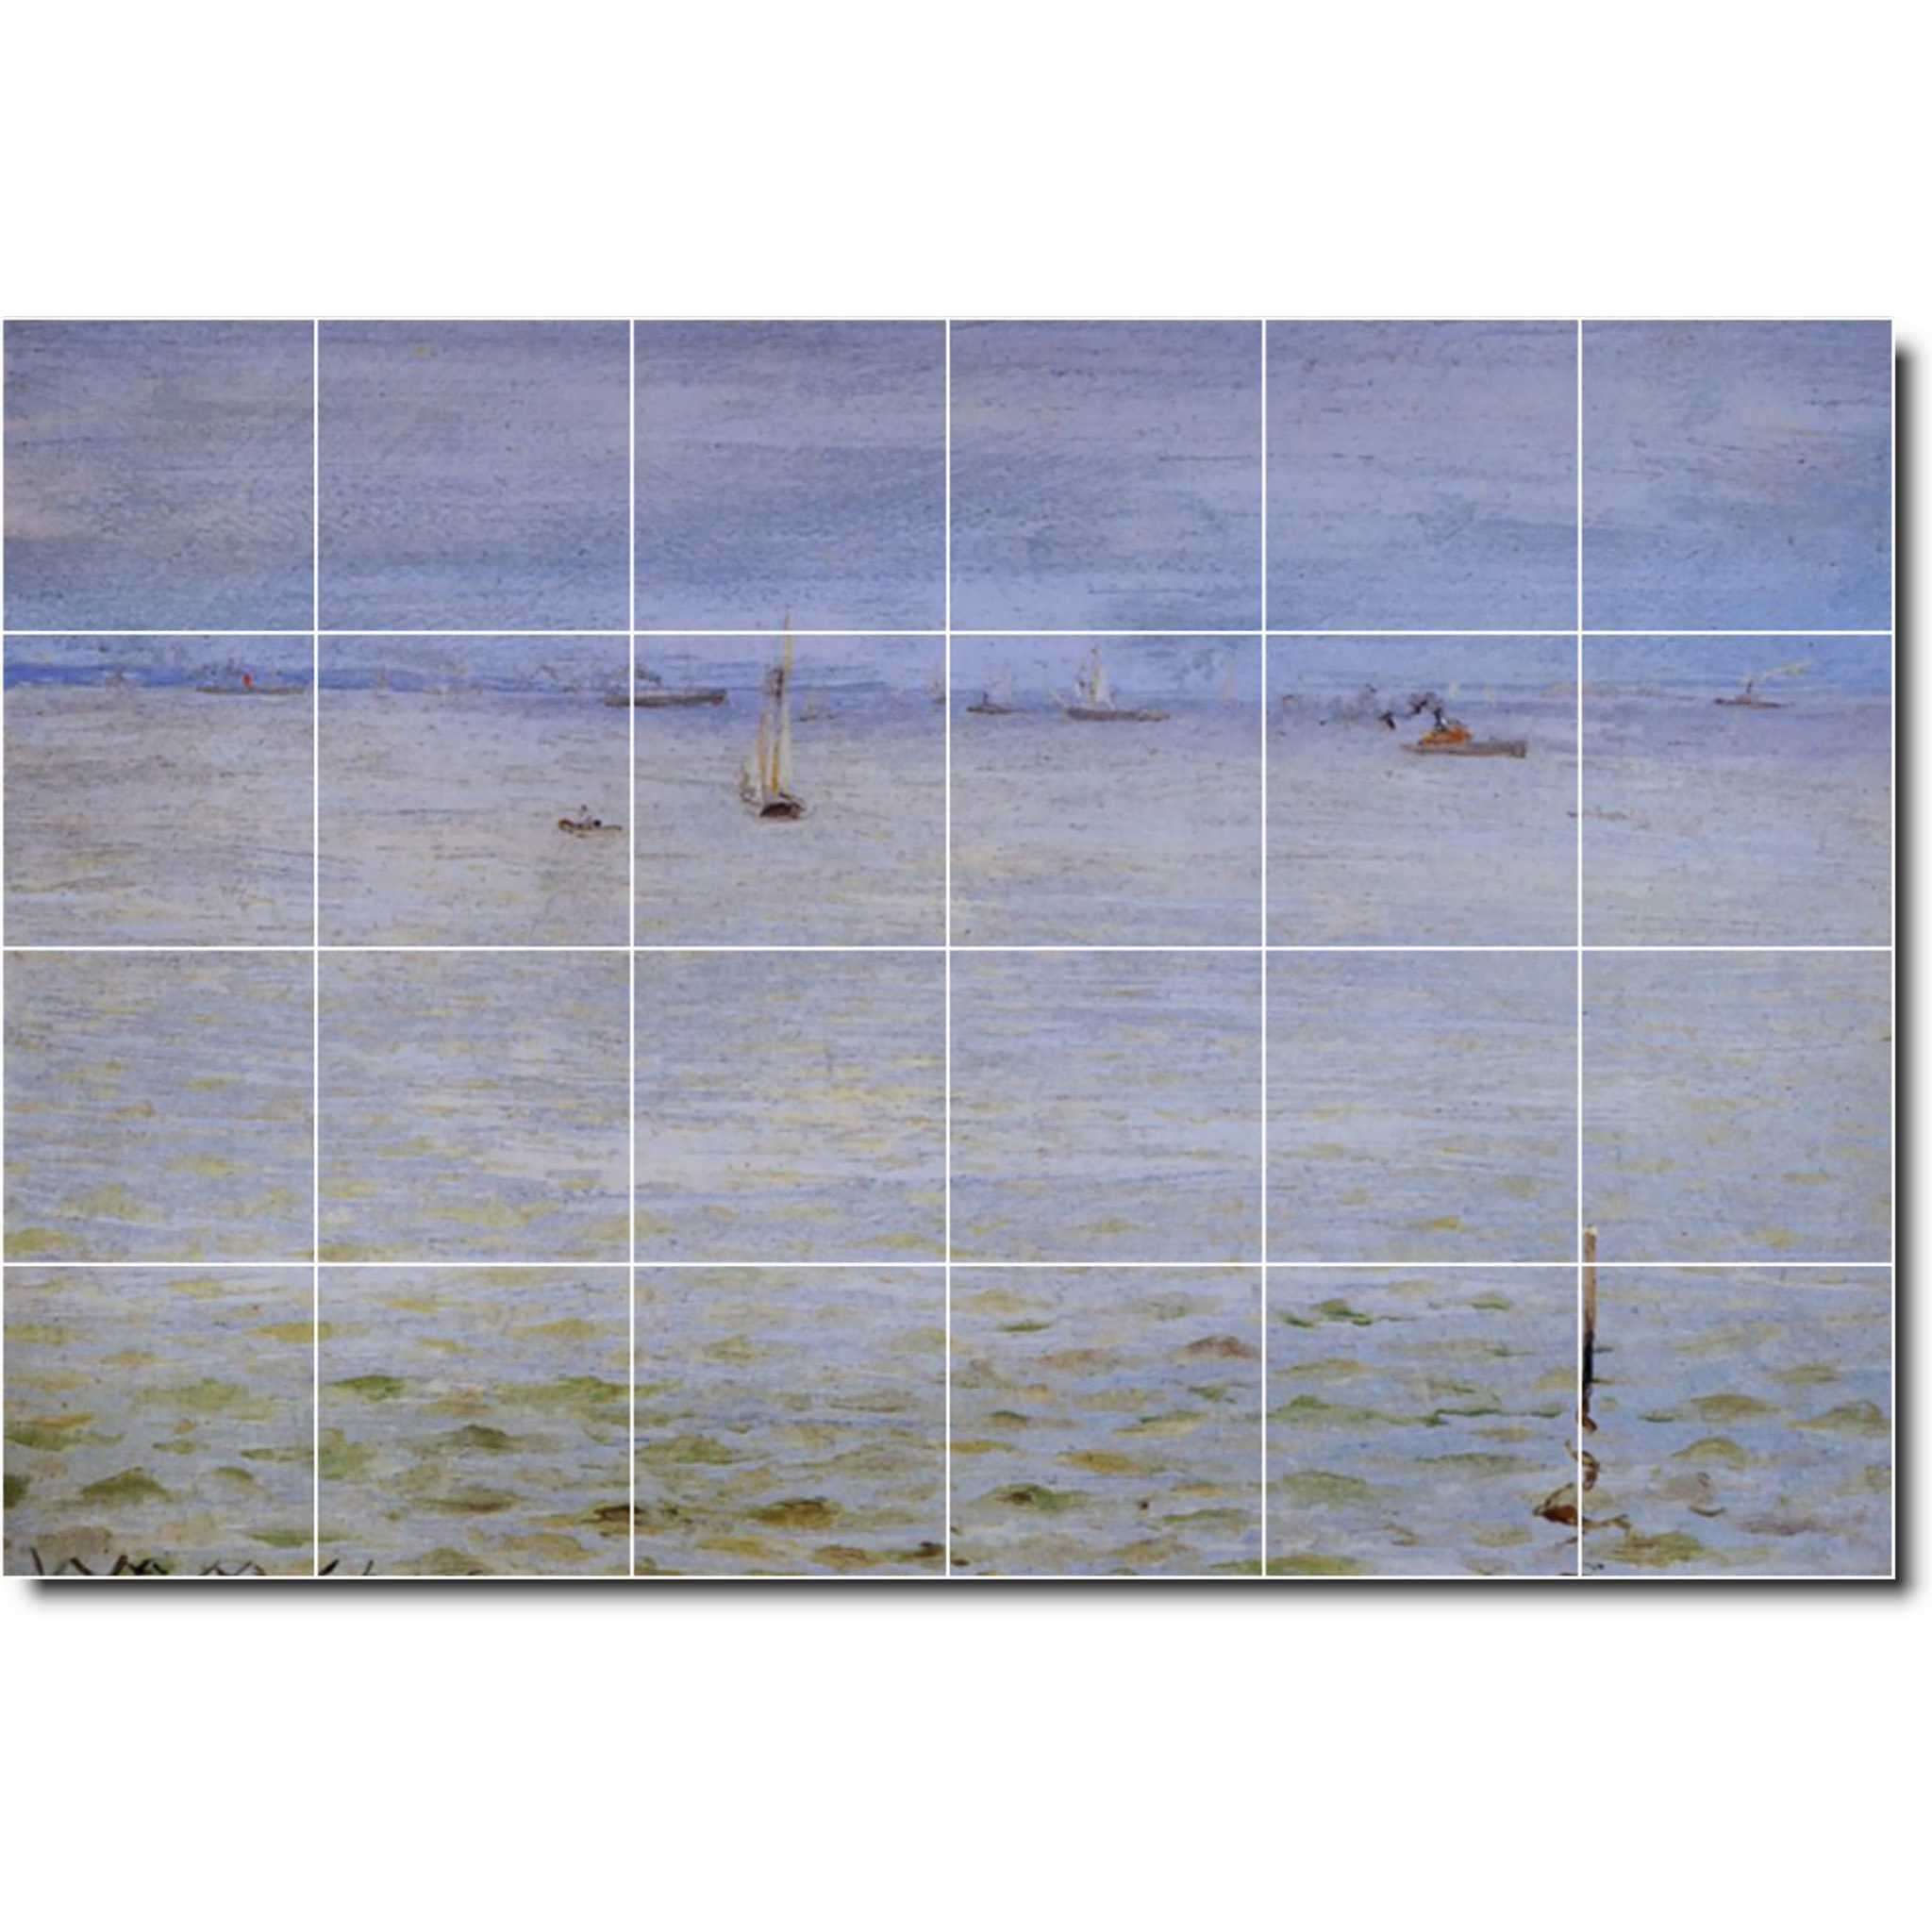 william chase waterfront painting ceramic tile mural p01620